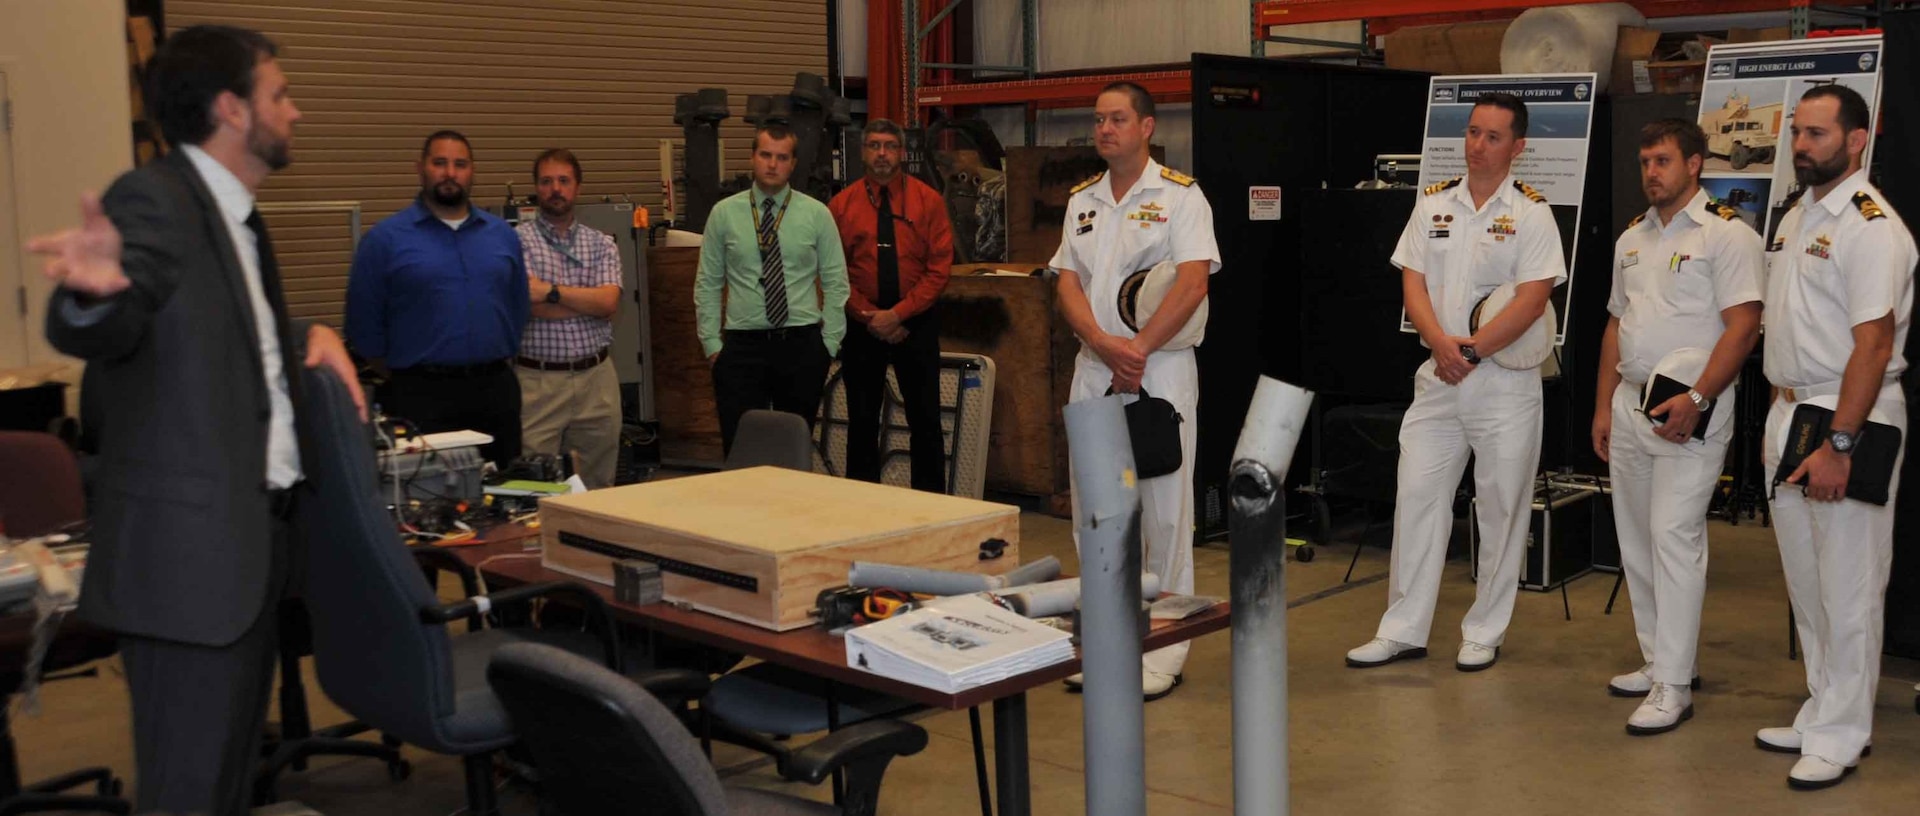 IMAGE: DAHLGREN, Va. (Aug. 16, 2018) – Dr. Chris Lloyd, High Energy Laser Lethality Lead at Naval Surface Warfare Center Dahlgren Division (NSWCDD), briefs Royal Australian Navy (RAN) Commodore Peter Leavy and his delegation at the NSWCDD Laser Lethality Lab during the RAN delegation's NSWCDD visit. Lloyd explained the importance of rigorous modeling and laboratory testing against target materials to ensure high energy laser systems are built that meet the requirements of the warfighter once fielded. NSWCDD is drawing on its knowledge of electromagnetic launchers, hypervelocity projectiles, and directed energy weapons, in addition to its established core capabilities in complex warfare systems development and integration to incorporate electric weapons technology into existing and future fighting forces and platforms. (Photo by U.S. Navy/Released)